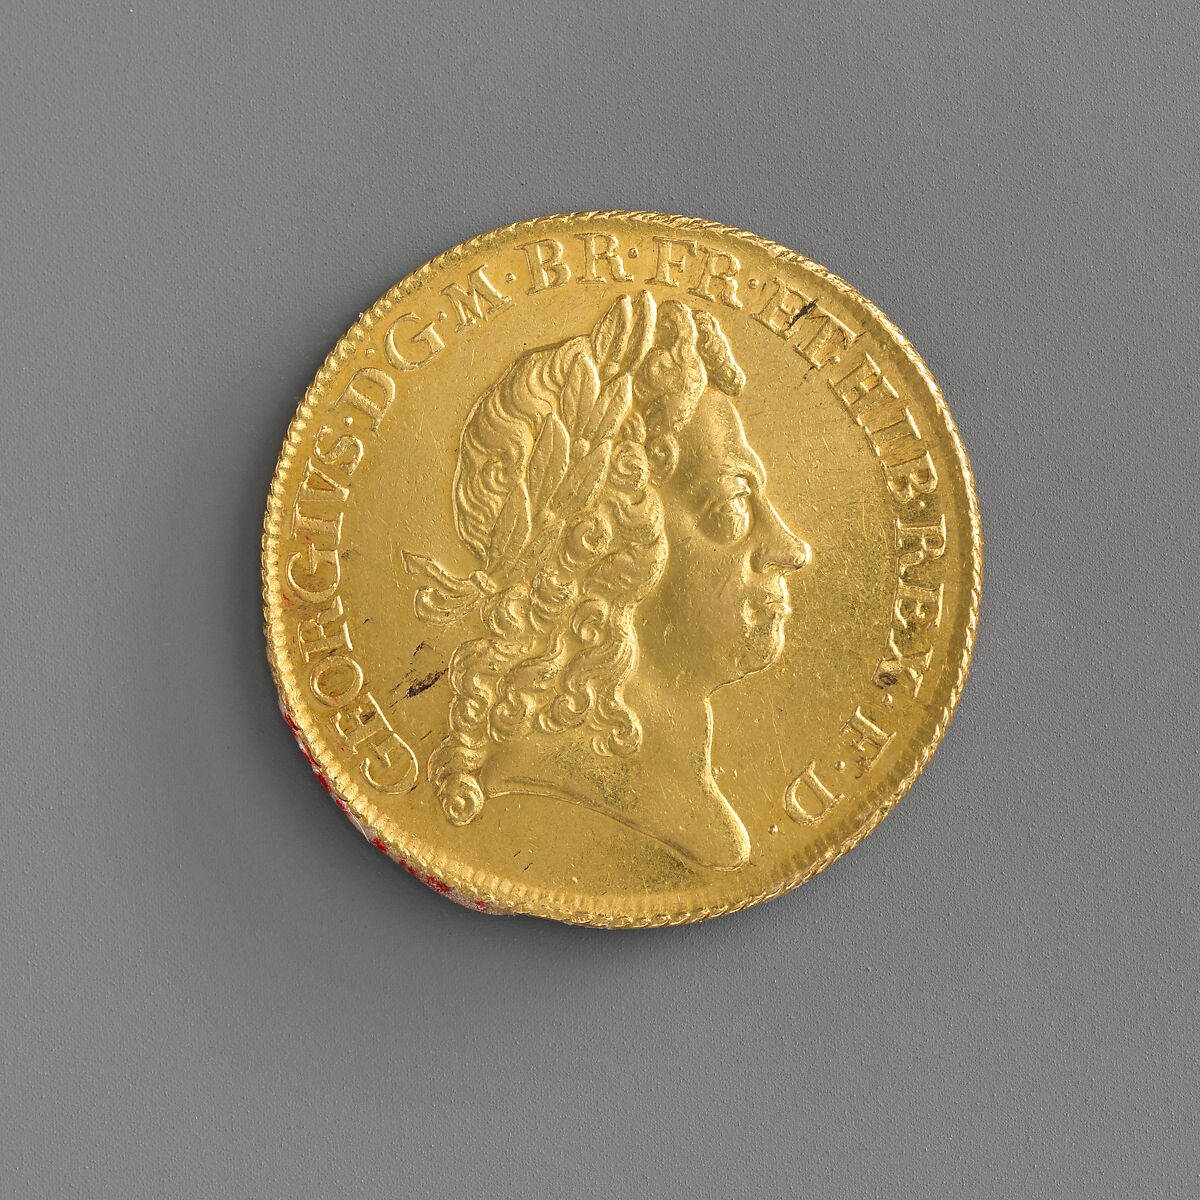 Two guineas coin of George I, Medalist: John Croker (British, 1670–1741), Gold, British 